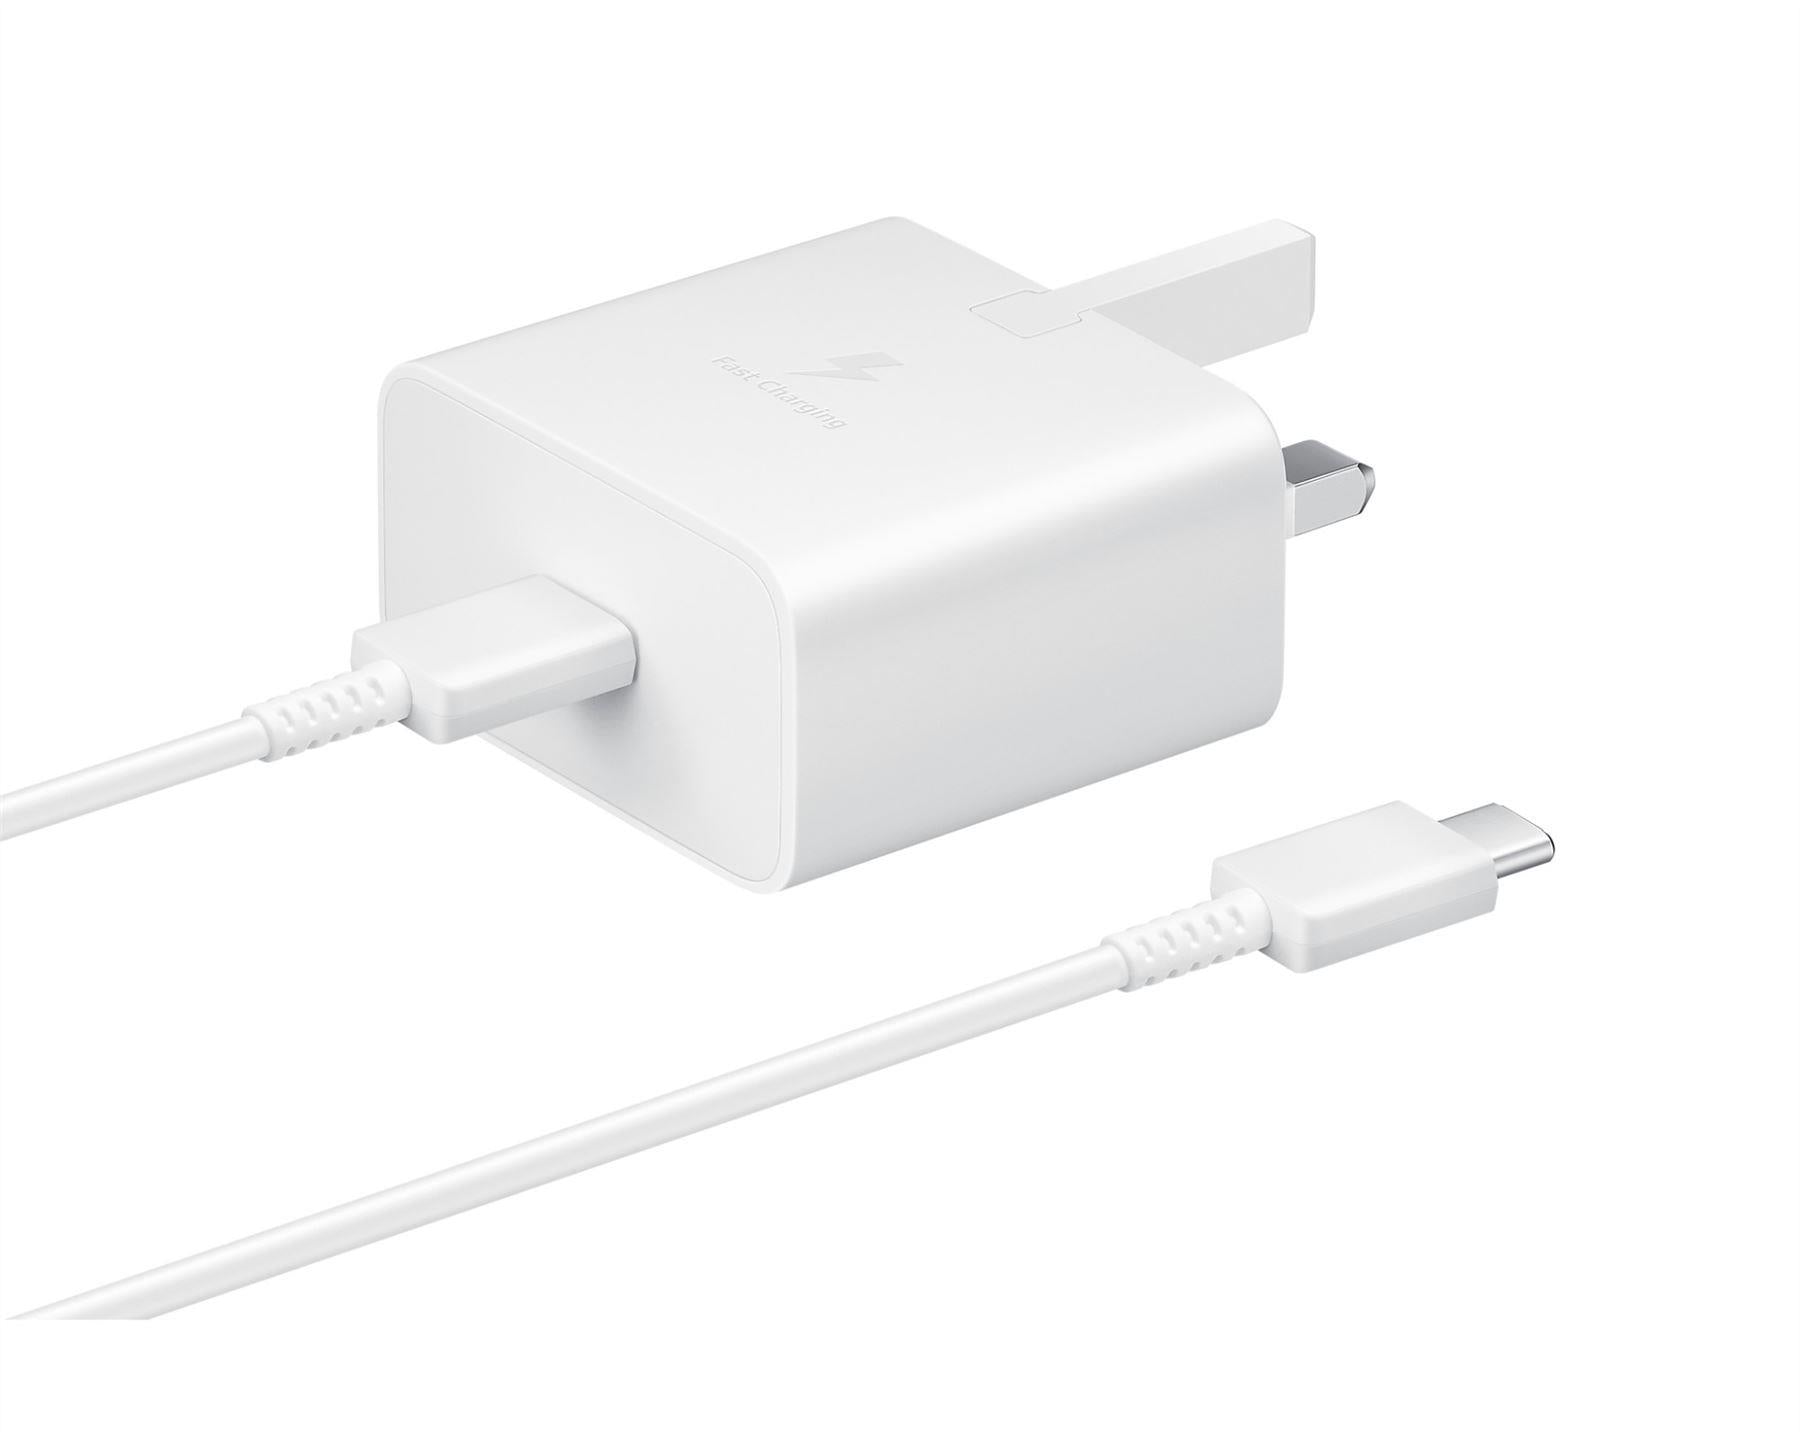 Official Samsung 15W USB C Mains Charger White with C to C Cable - EP-T1510XWEGGB